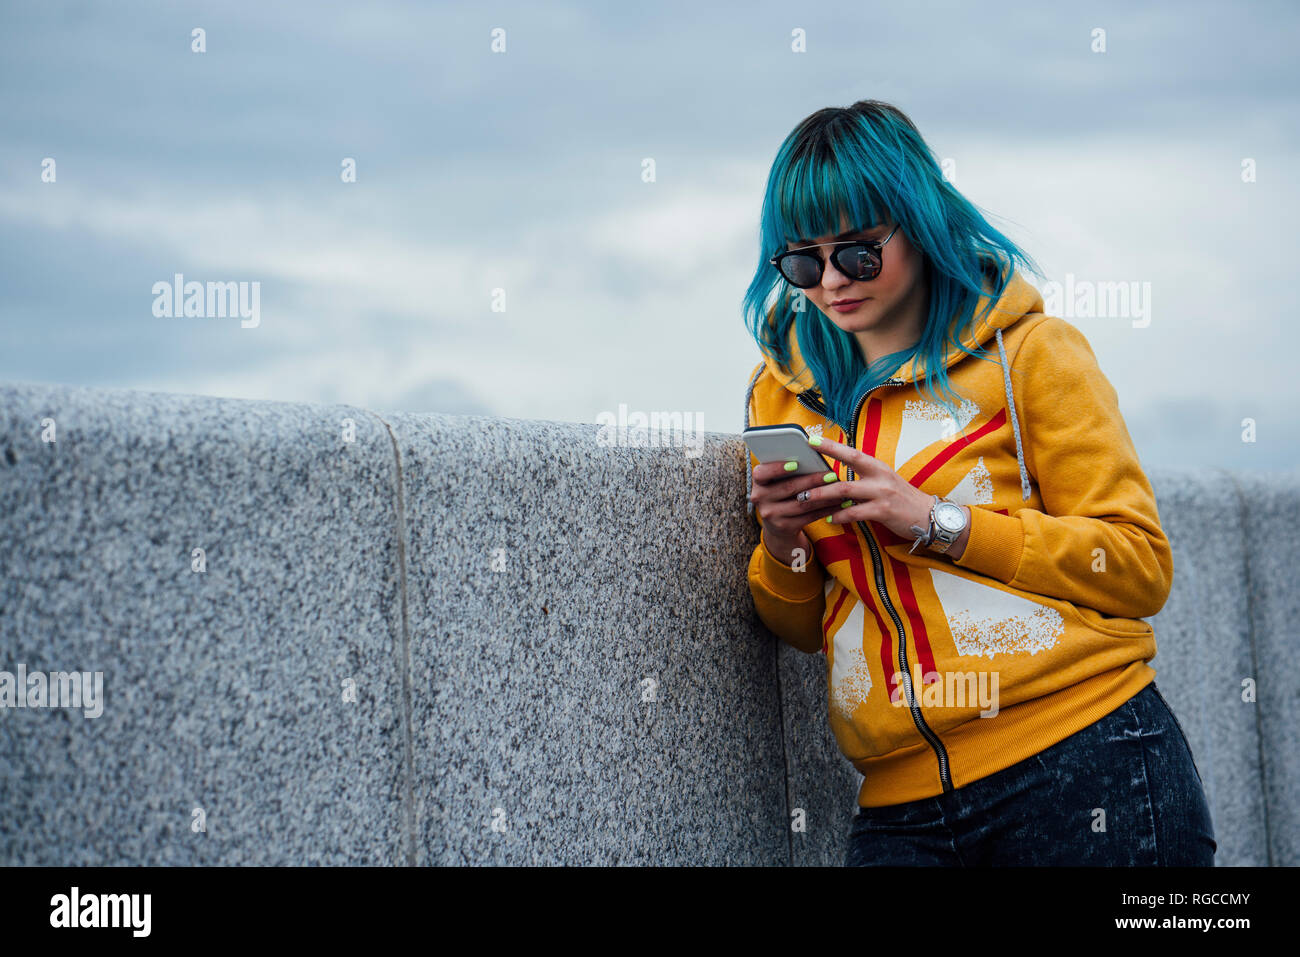 Portrait of young woman with dyed blue hair leaning against wall looking at cell phone Stock Photo